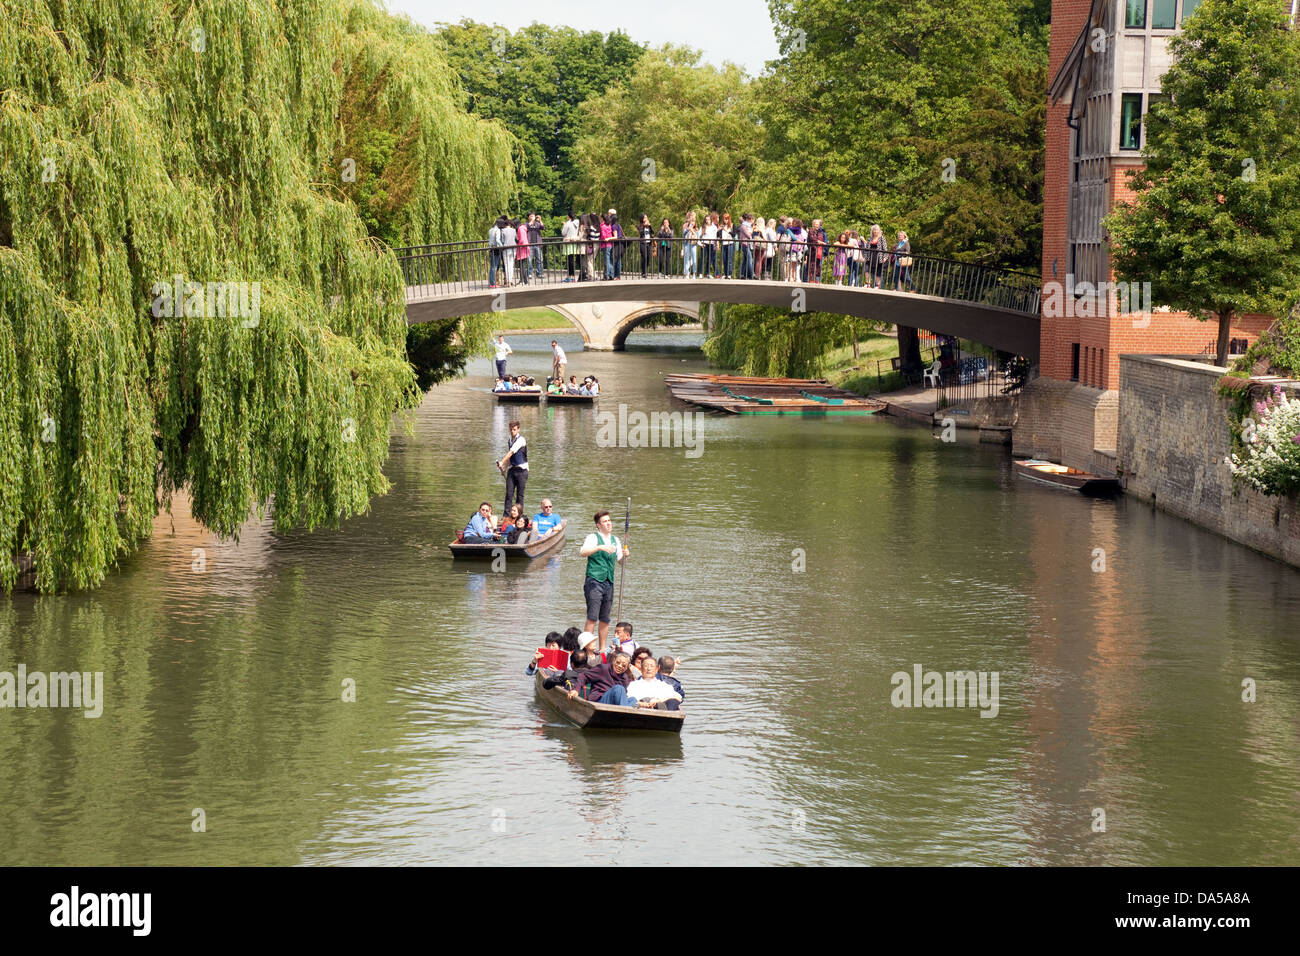 Punting, Cambridge UK - people and punts on the River Cam in summer seen from Clare Bridge, Cambridge England UK Stock Photo